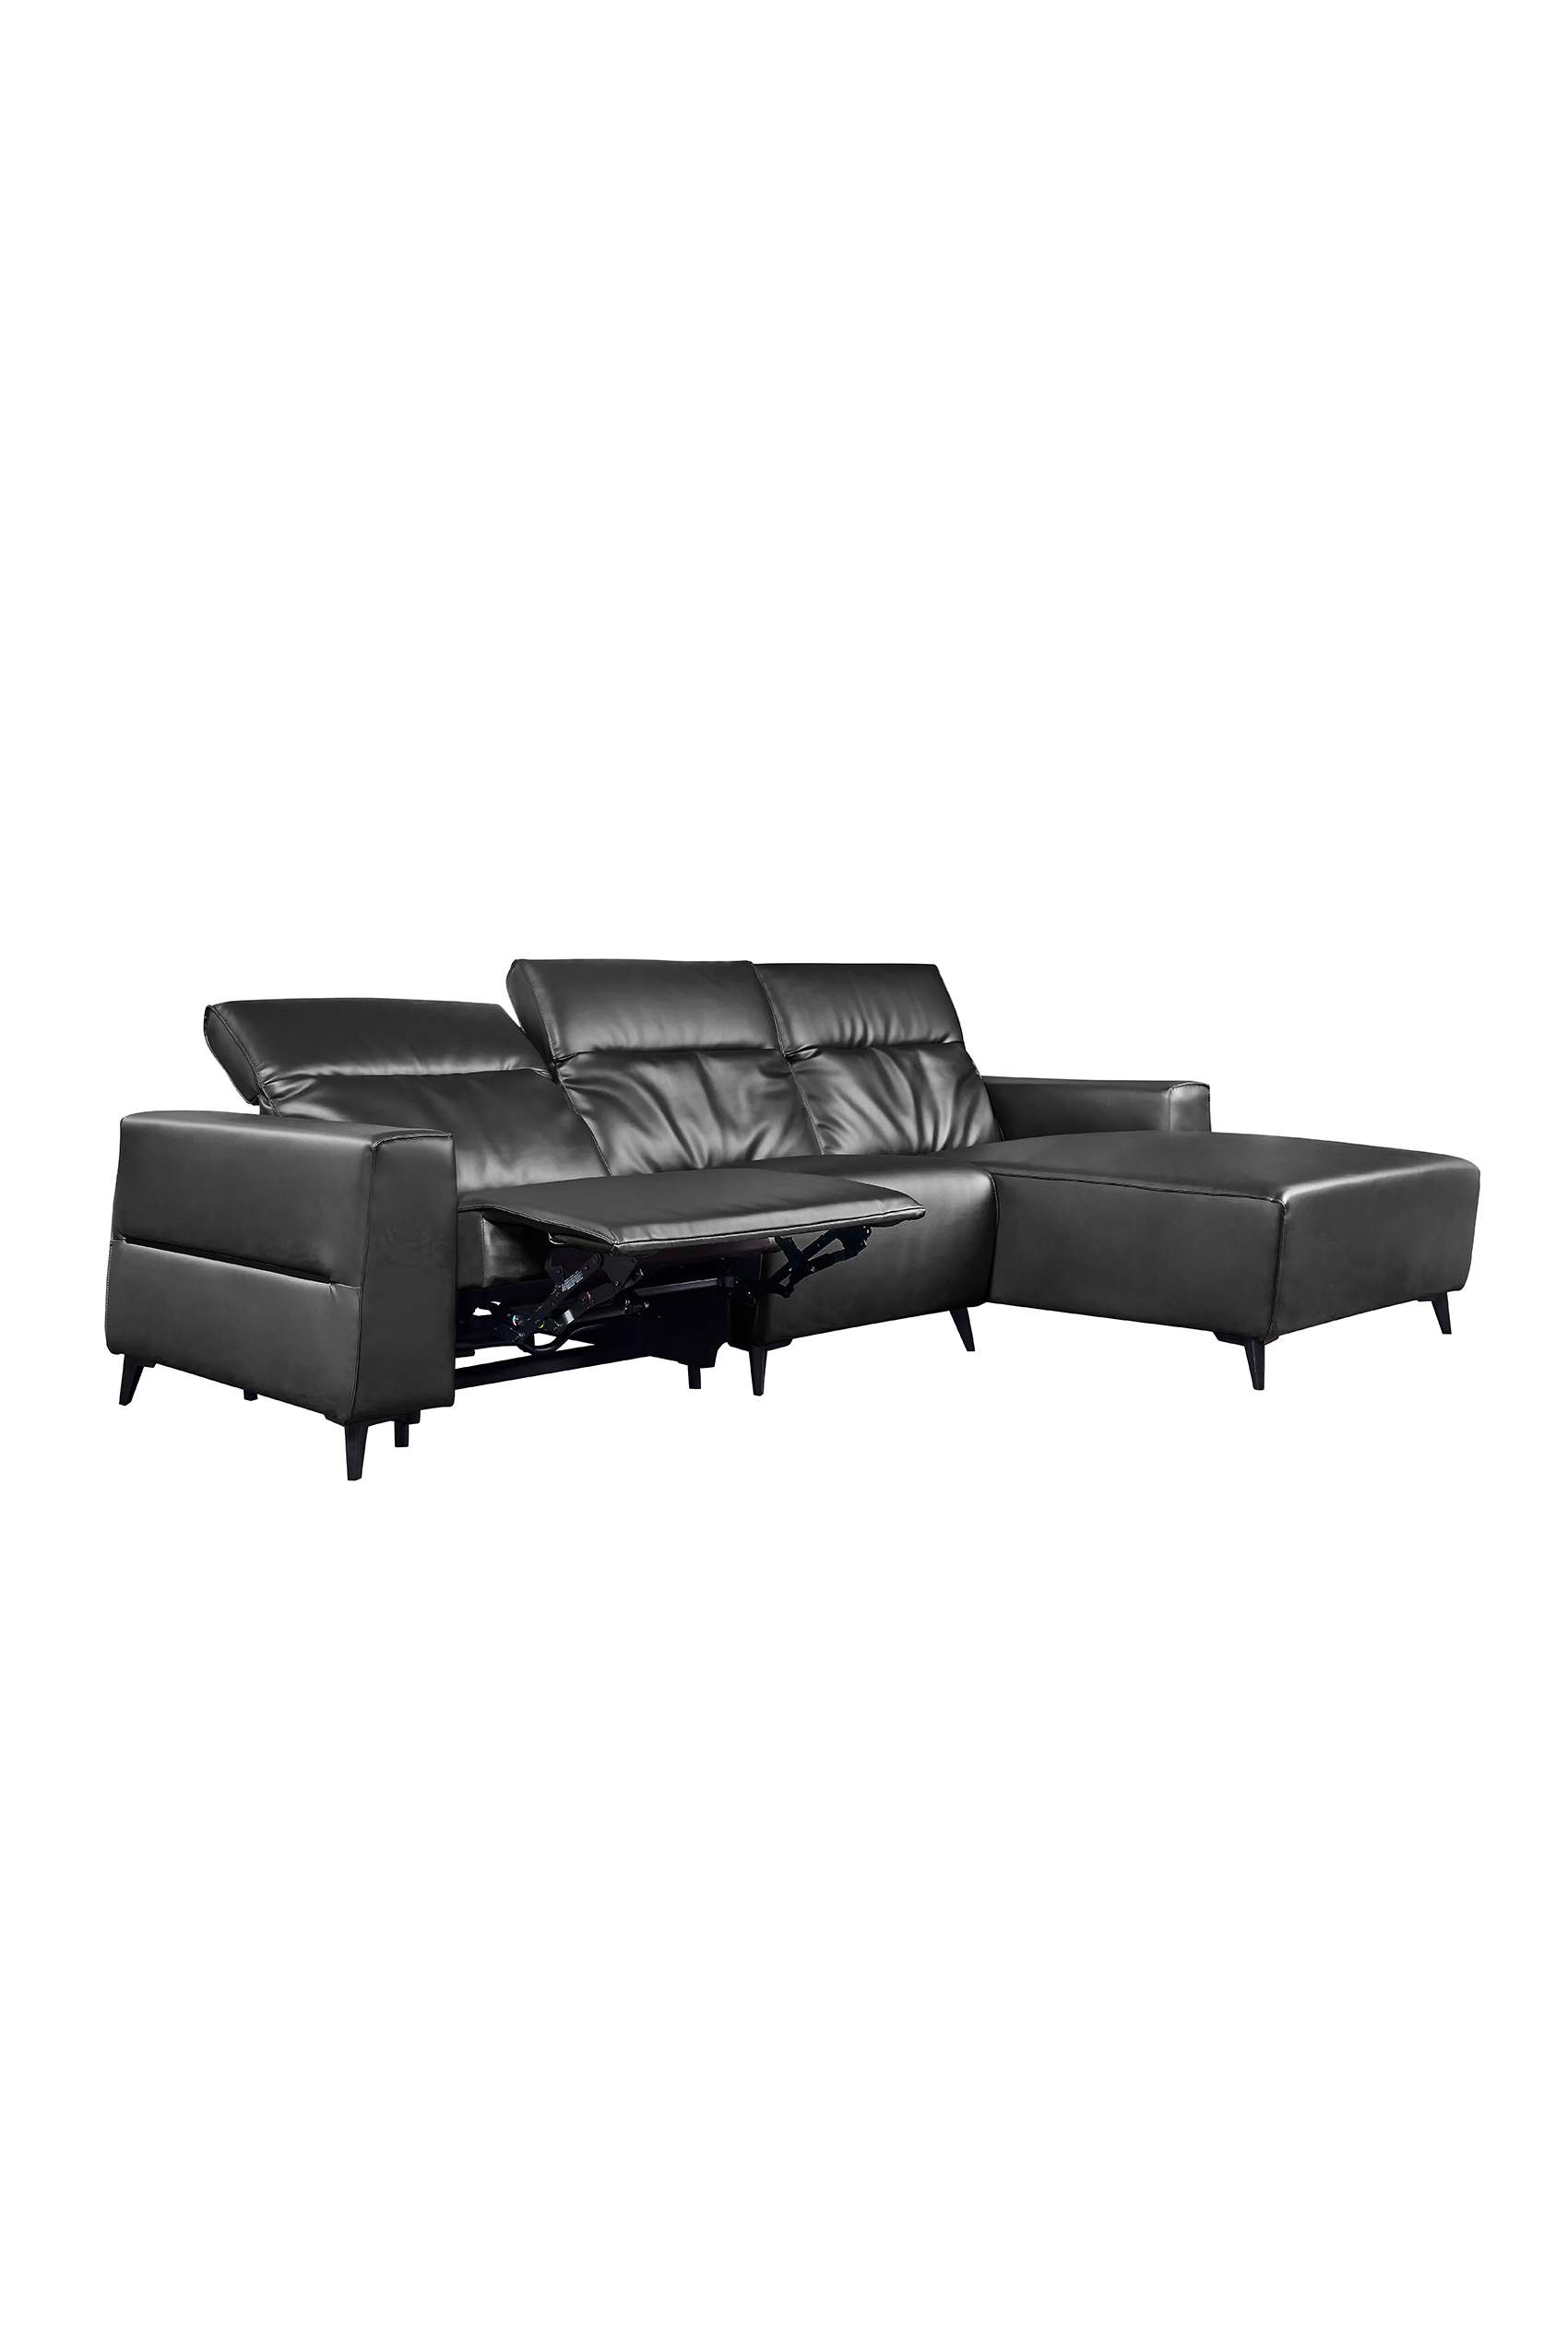 Terzigno L-Shape Leather Sofa with Recliner